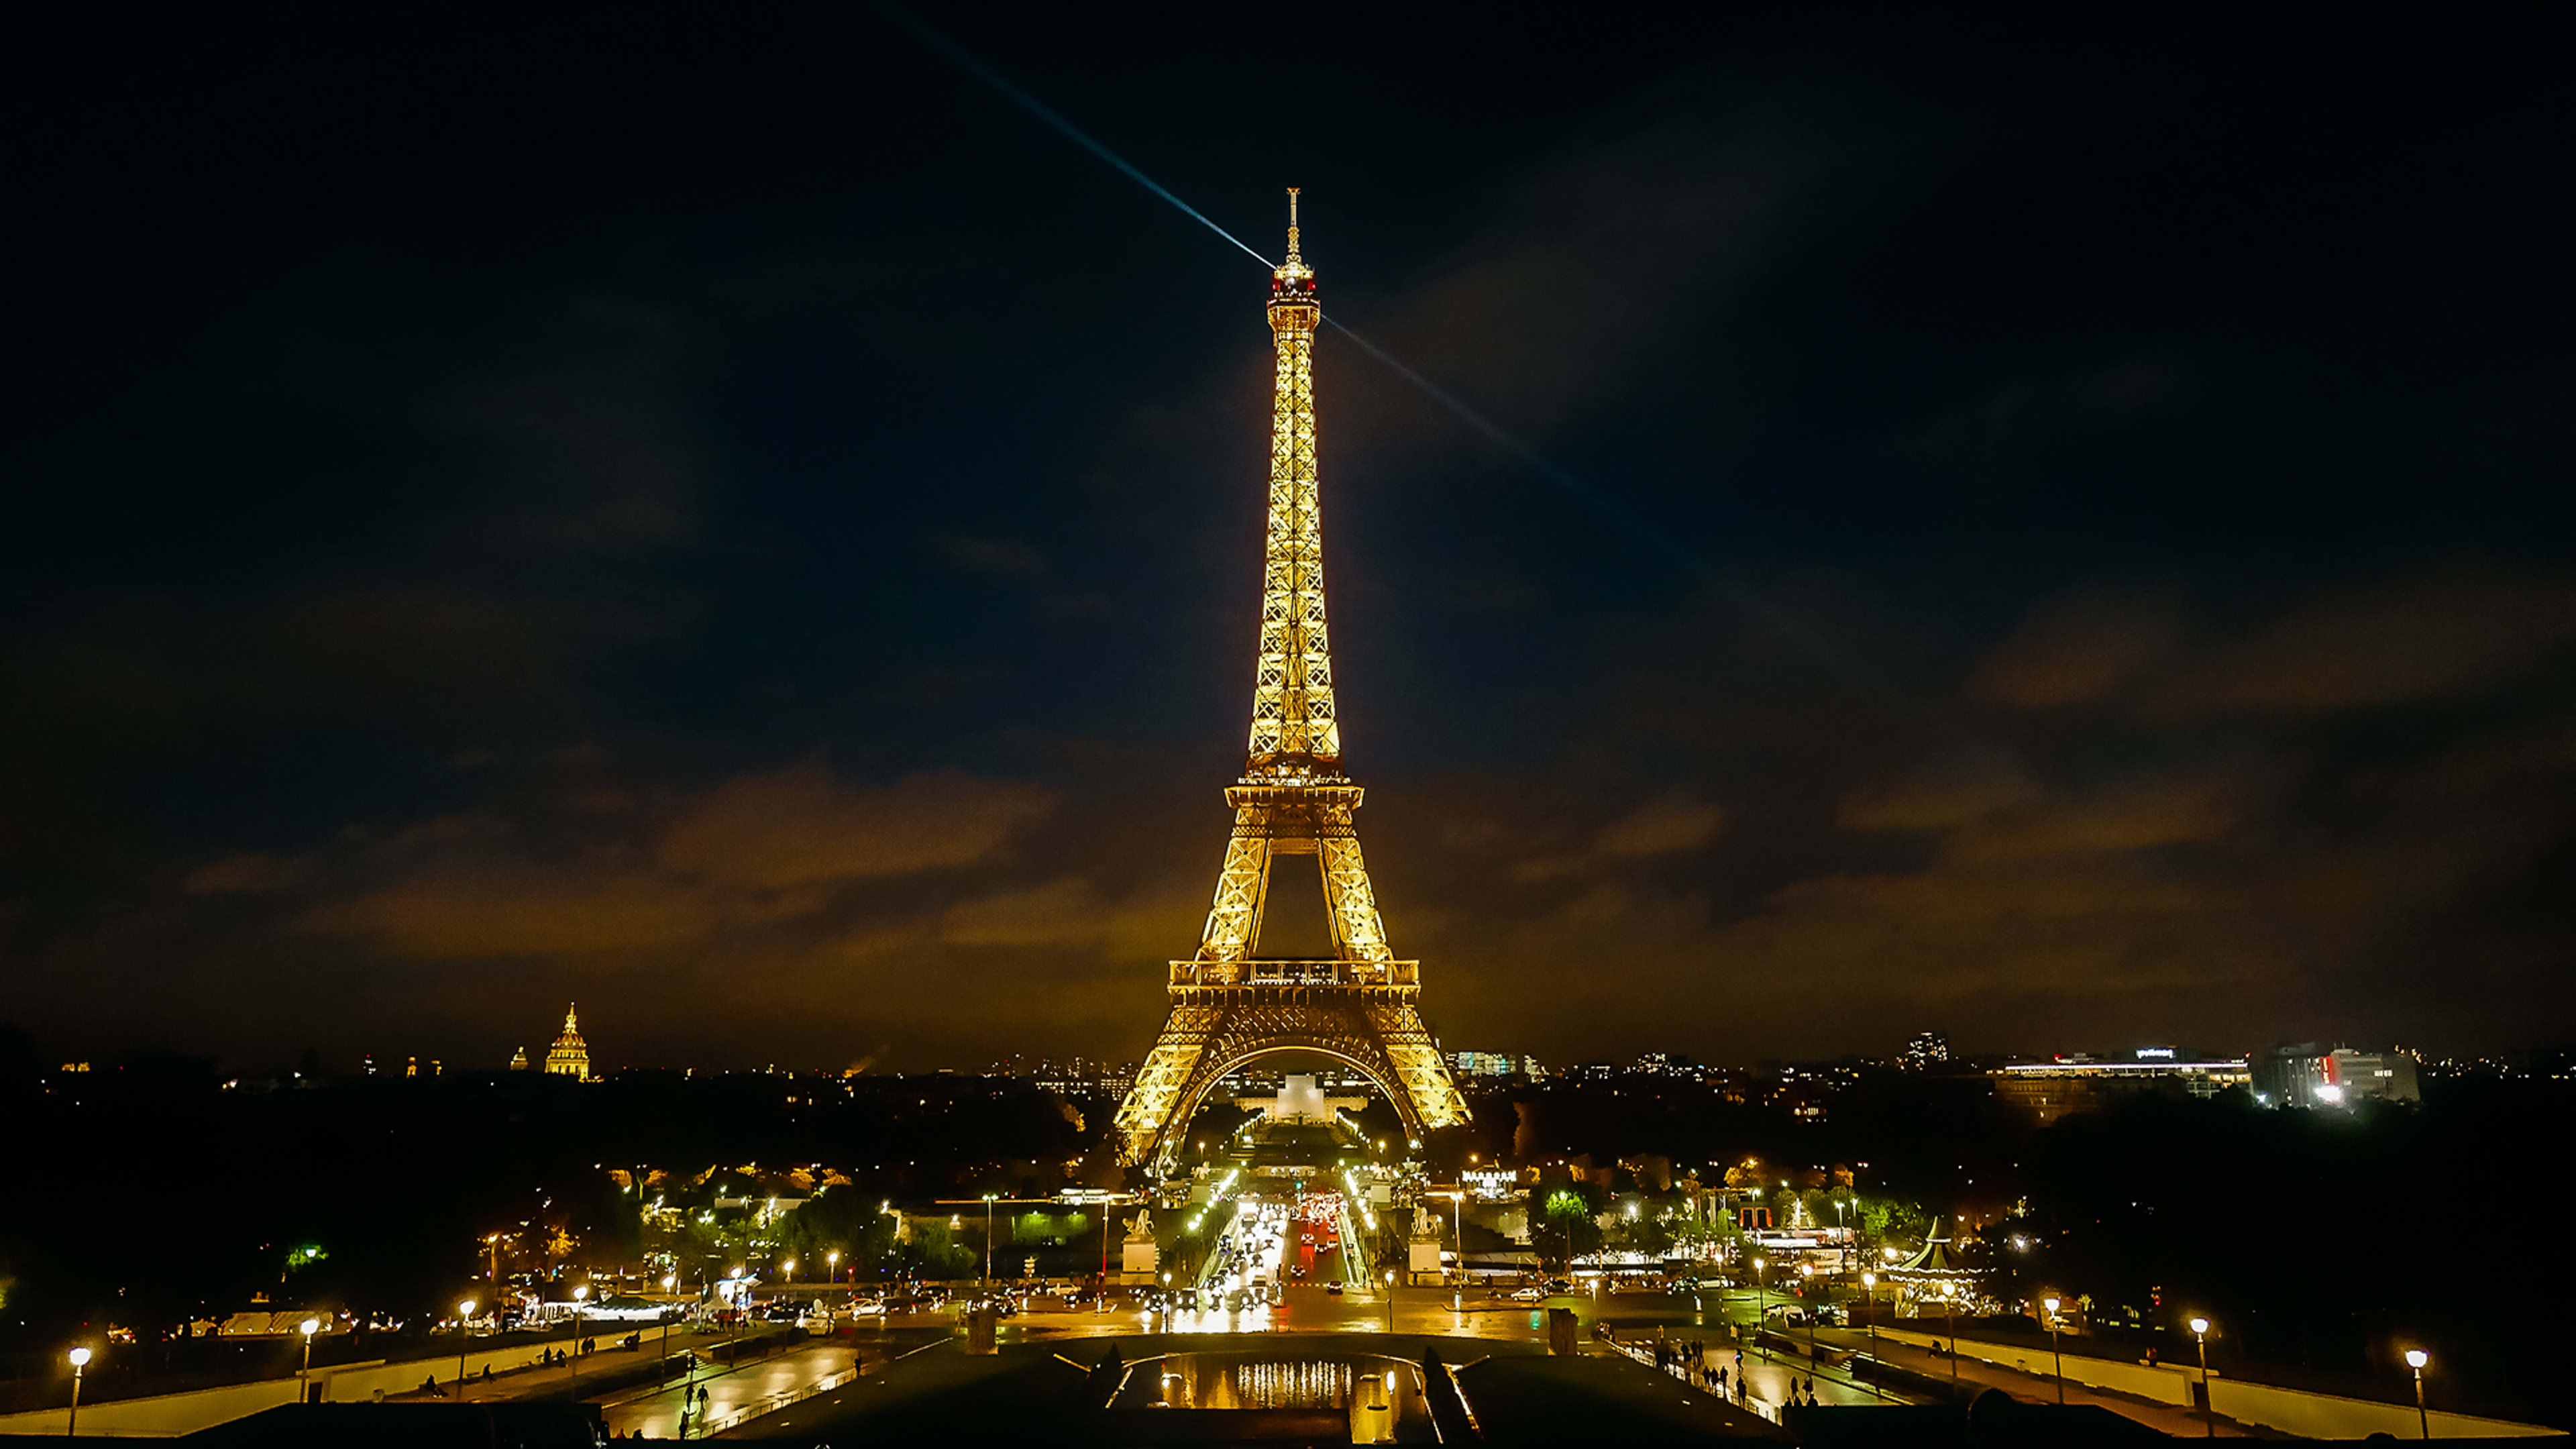 The Eiffel Tower’s famous lights will start shutting off early